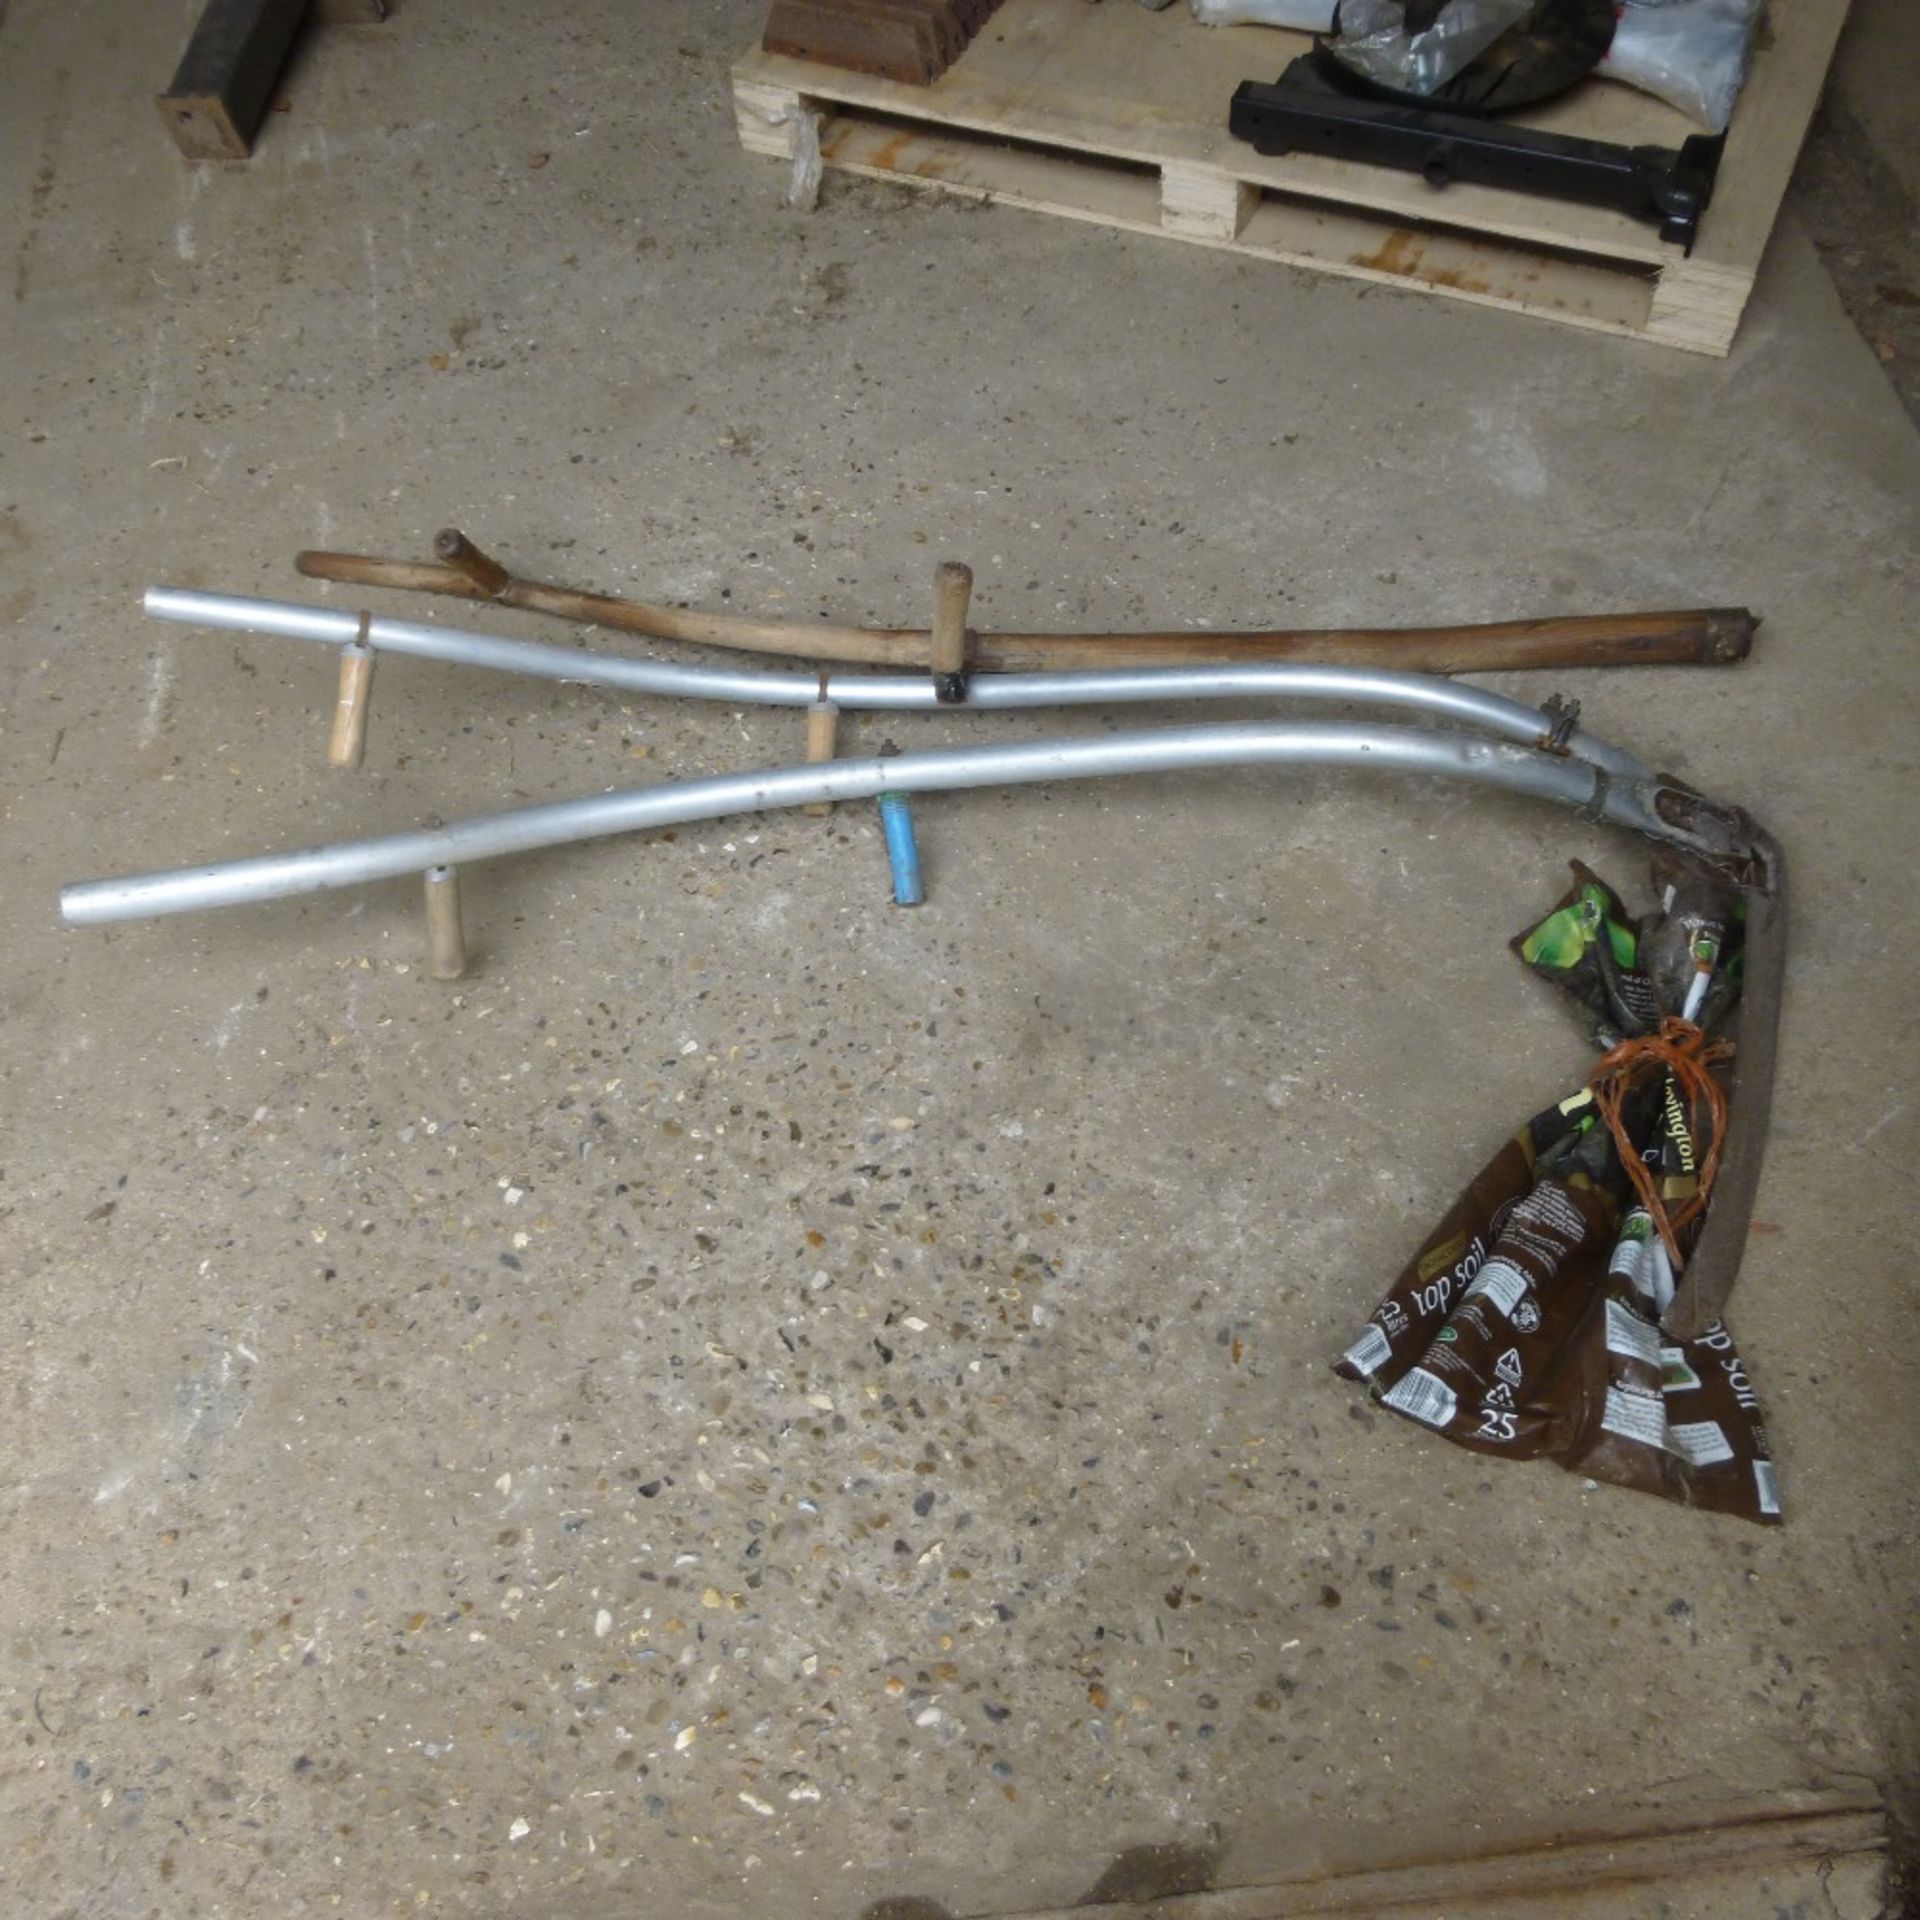 2 Long Handles Scythes and a spare handle